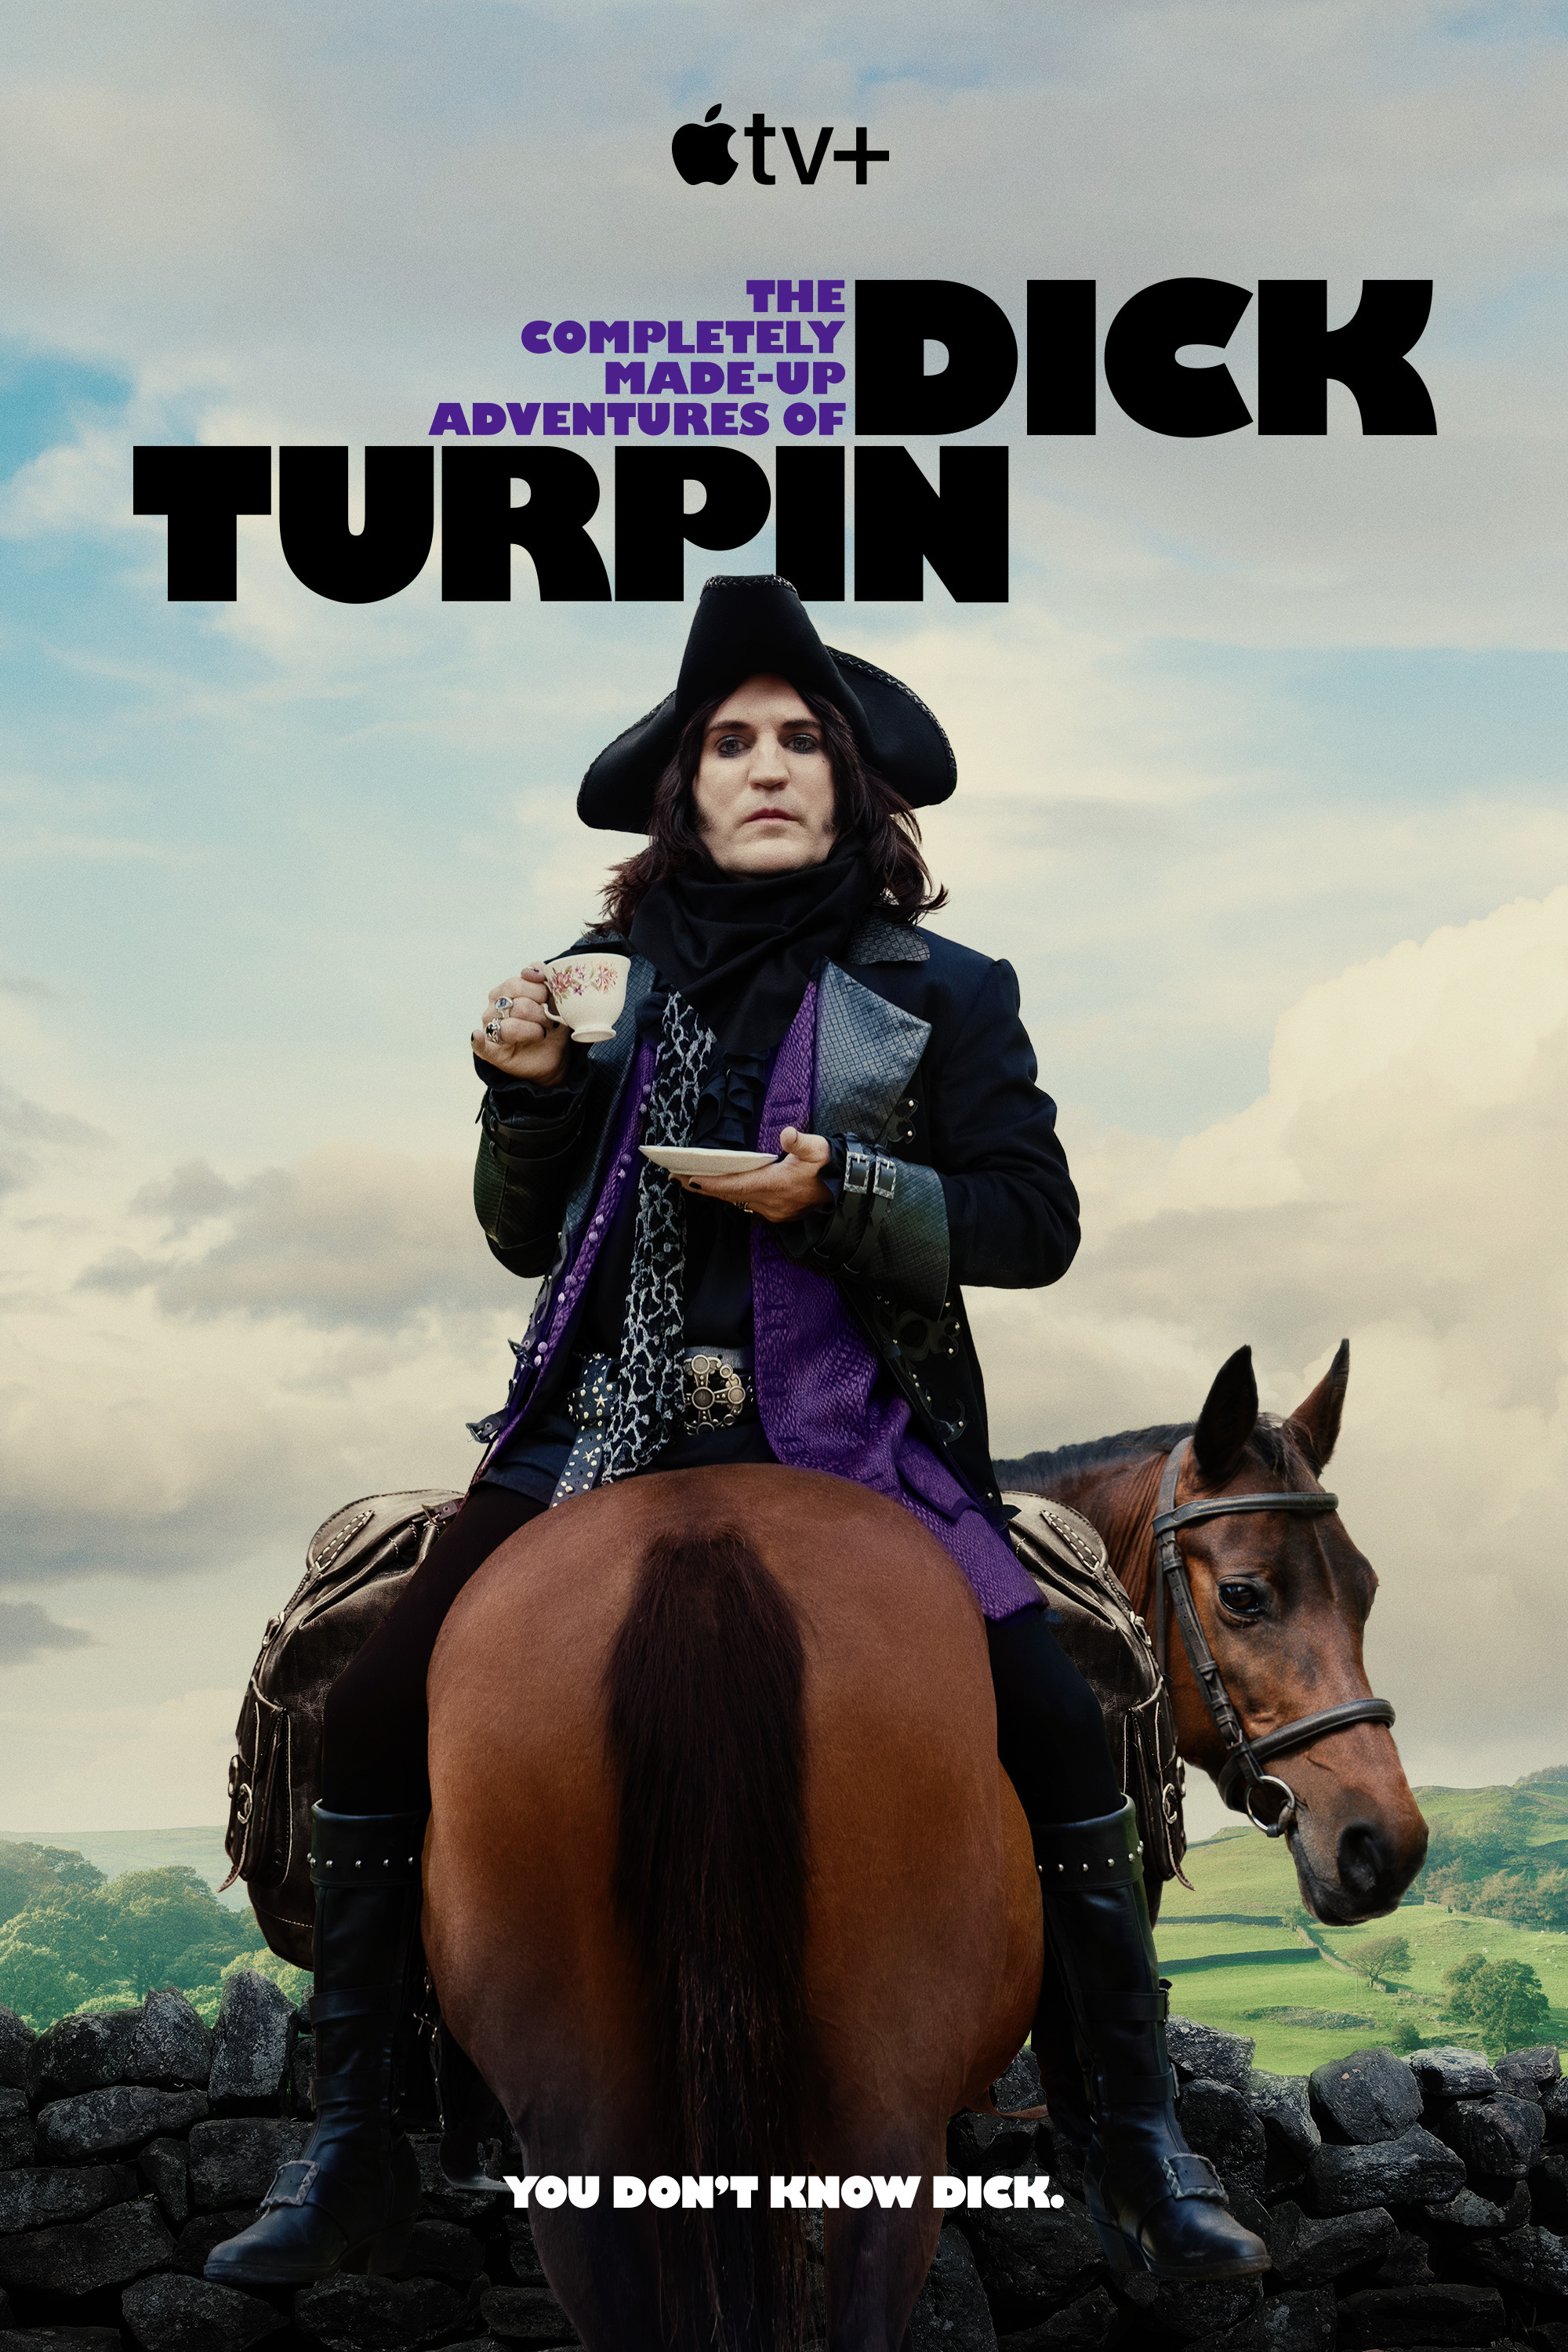 Mega Sized TV Poster Image for The Completely Made-Up Adventures of Dick Turpin 